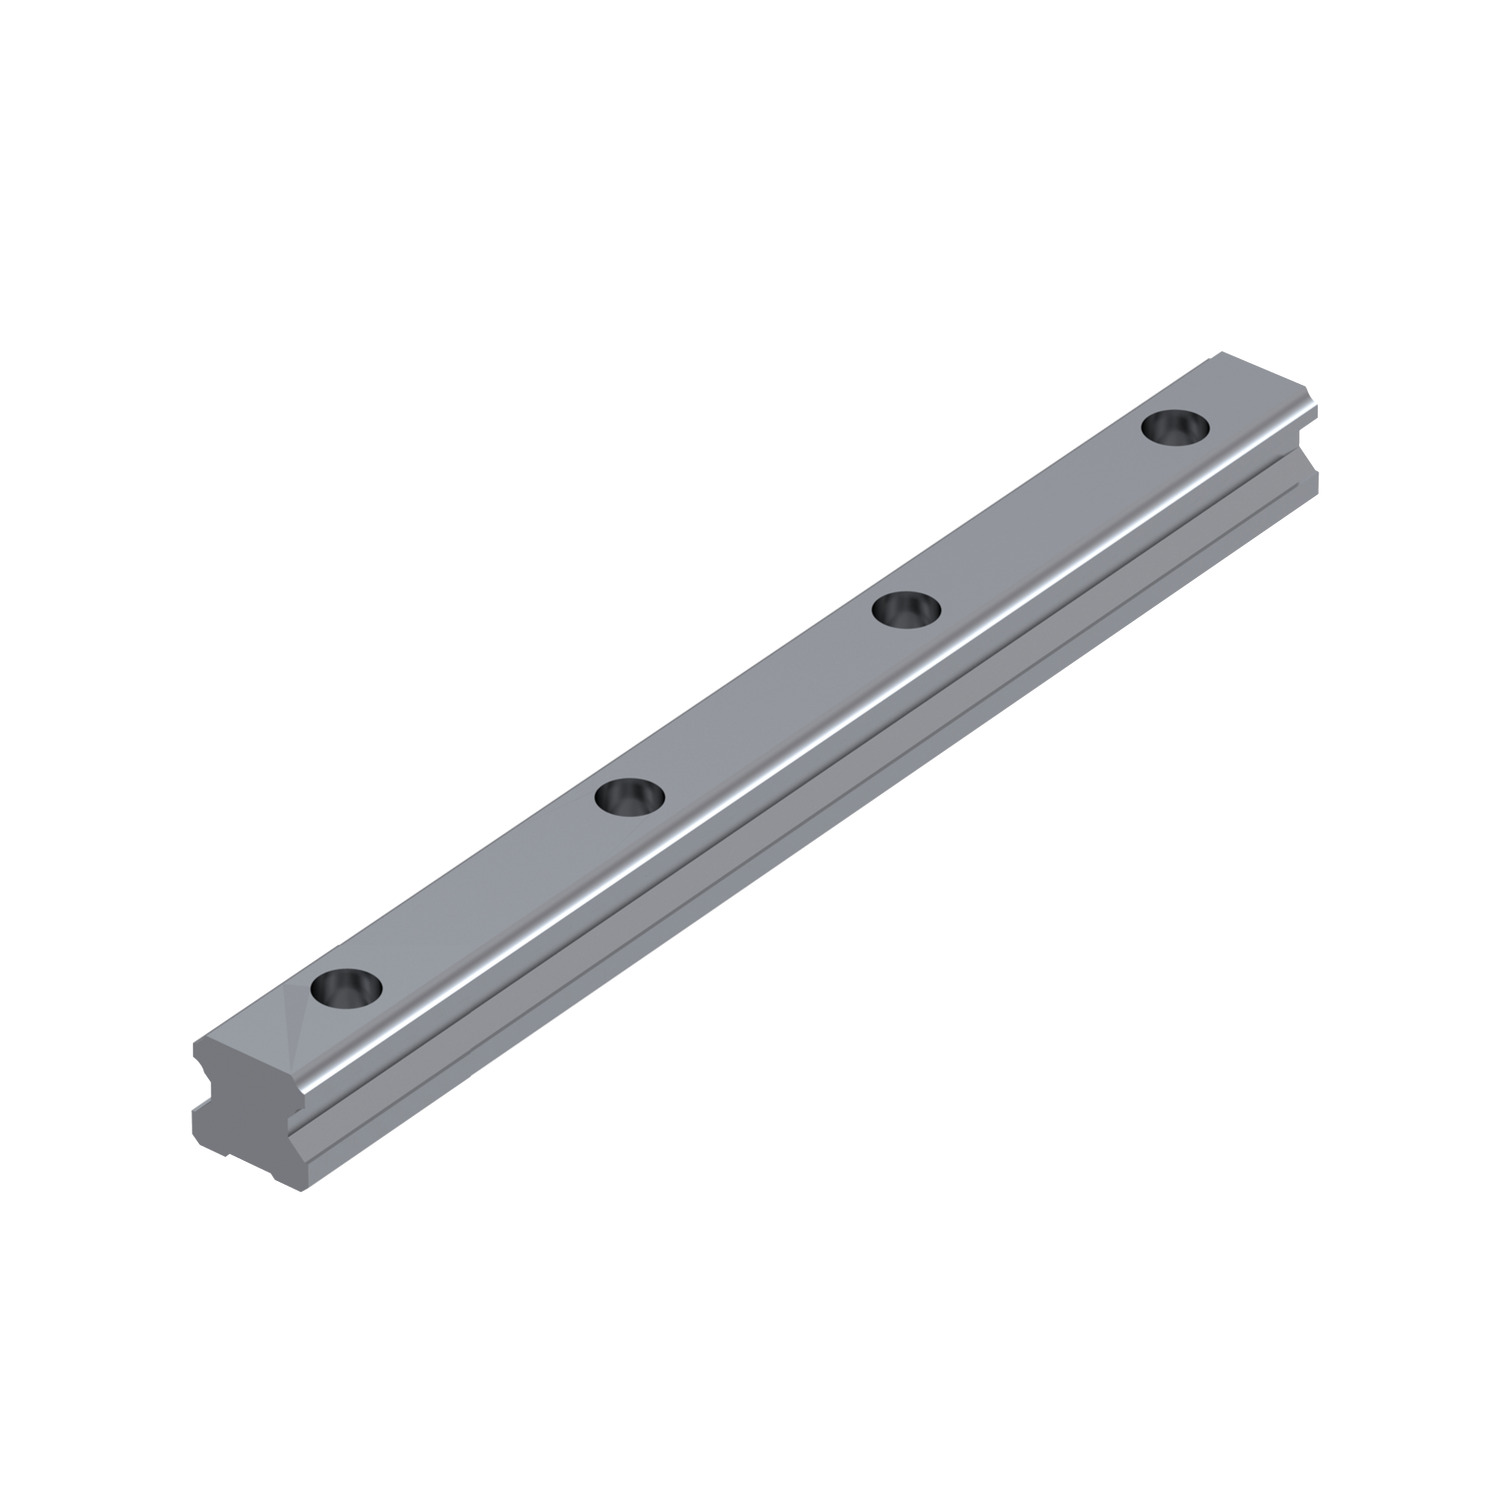 L1016.15-4000 Linear guide rail 15mm 4000 Hardened and ground steel. EC:20163099 WG:05063055289238